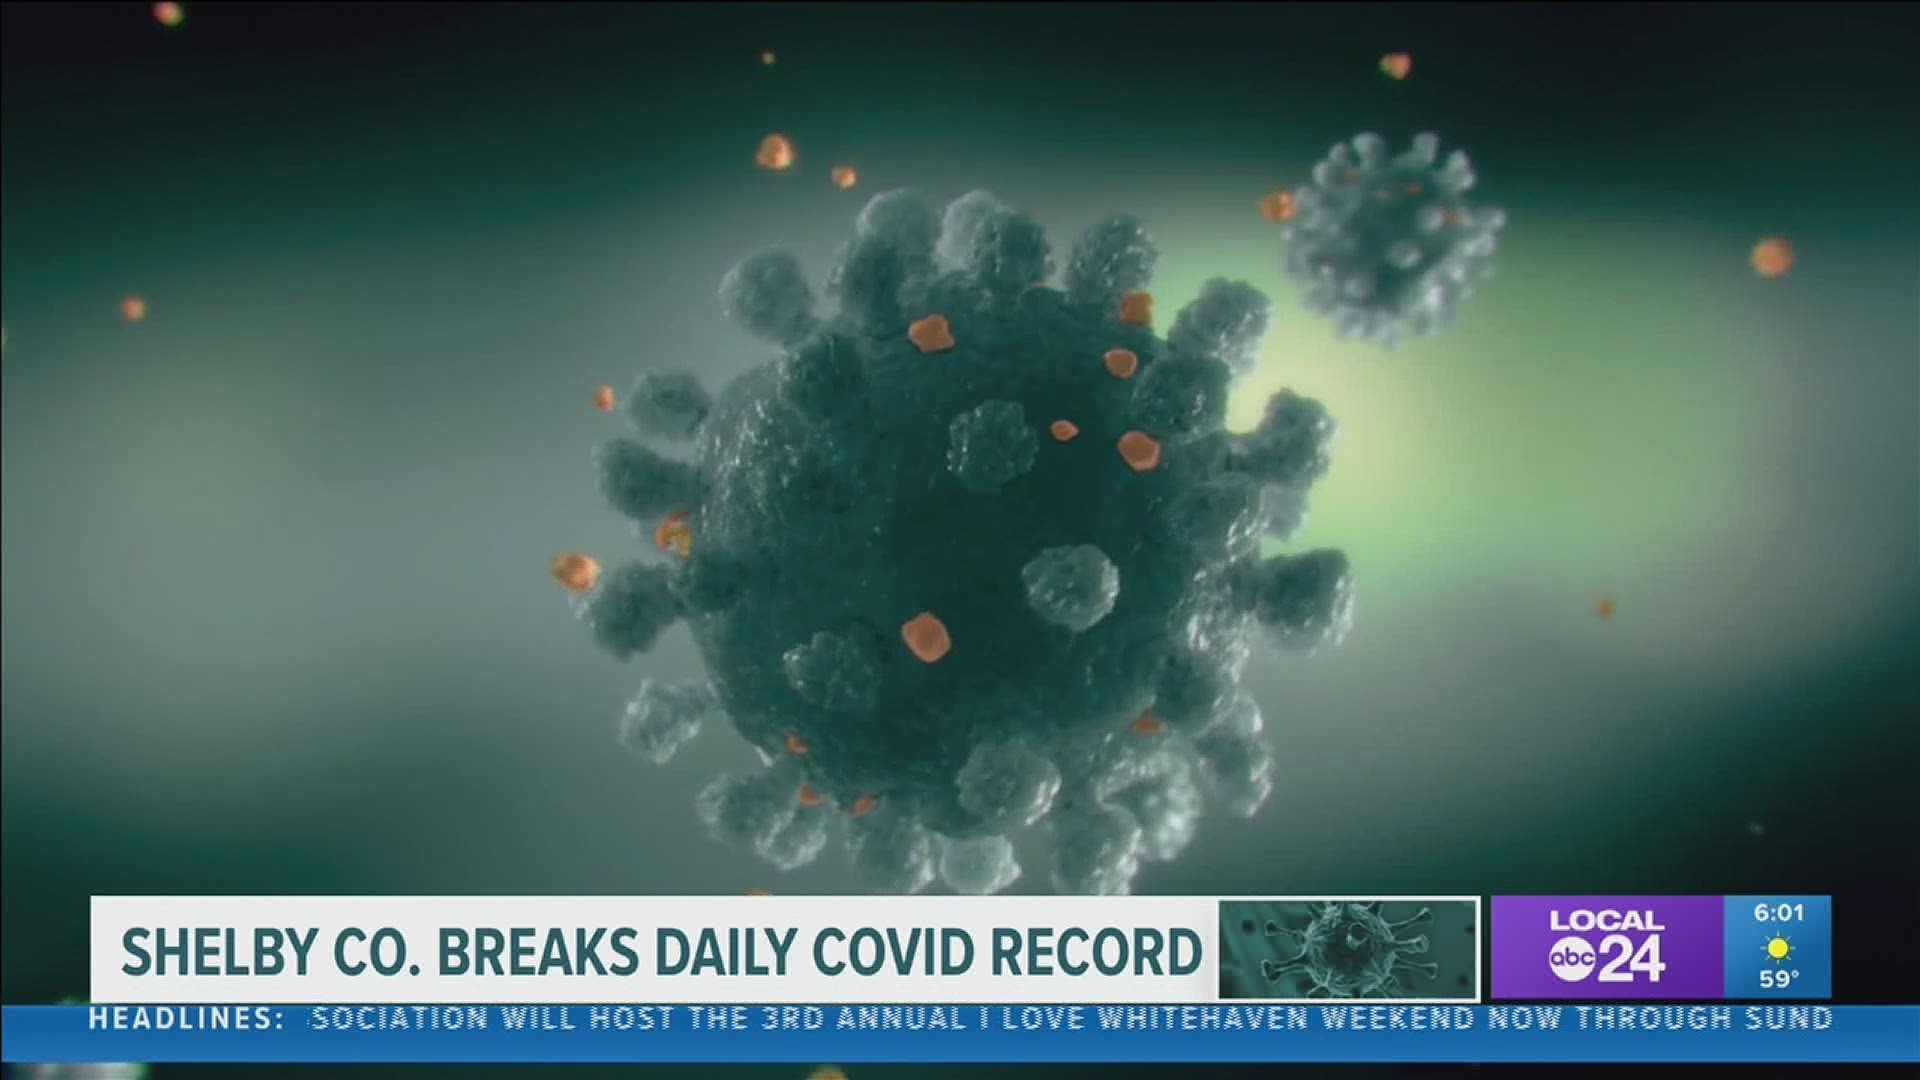 Tuesday saw new record highs for new COVID-19 cases and hospitalizations in Shelby County.